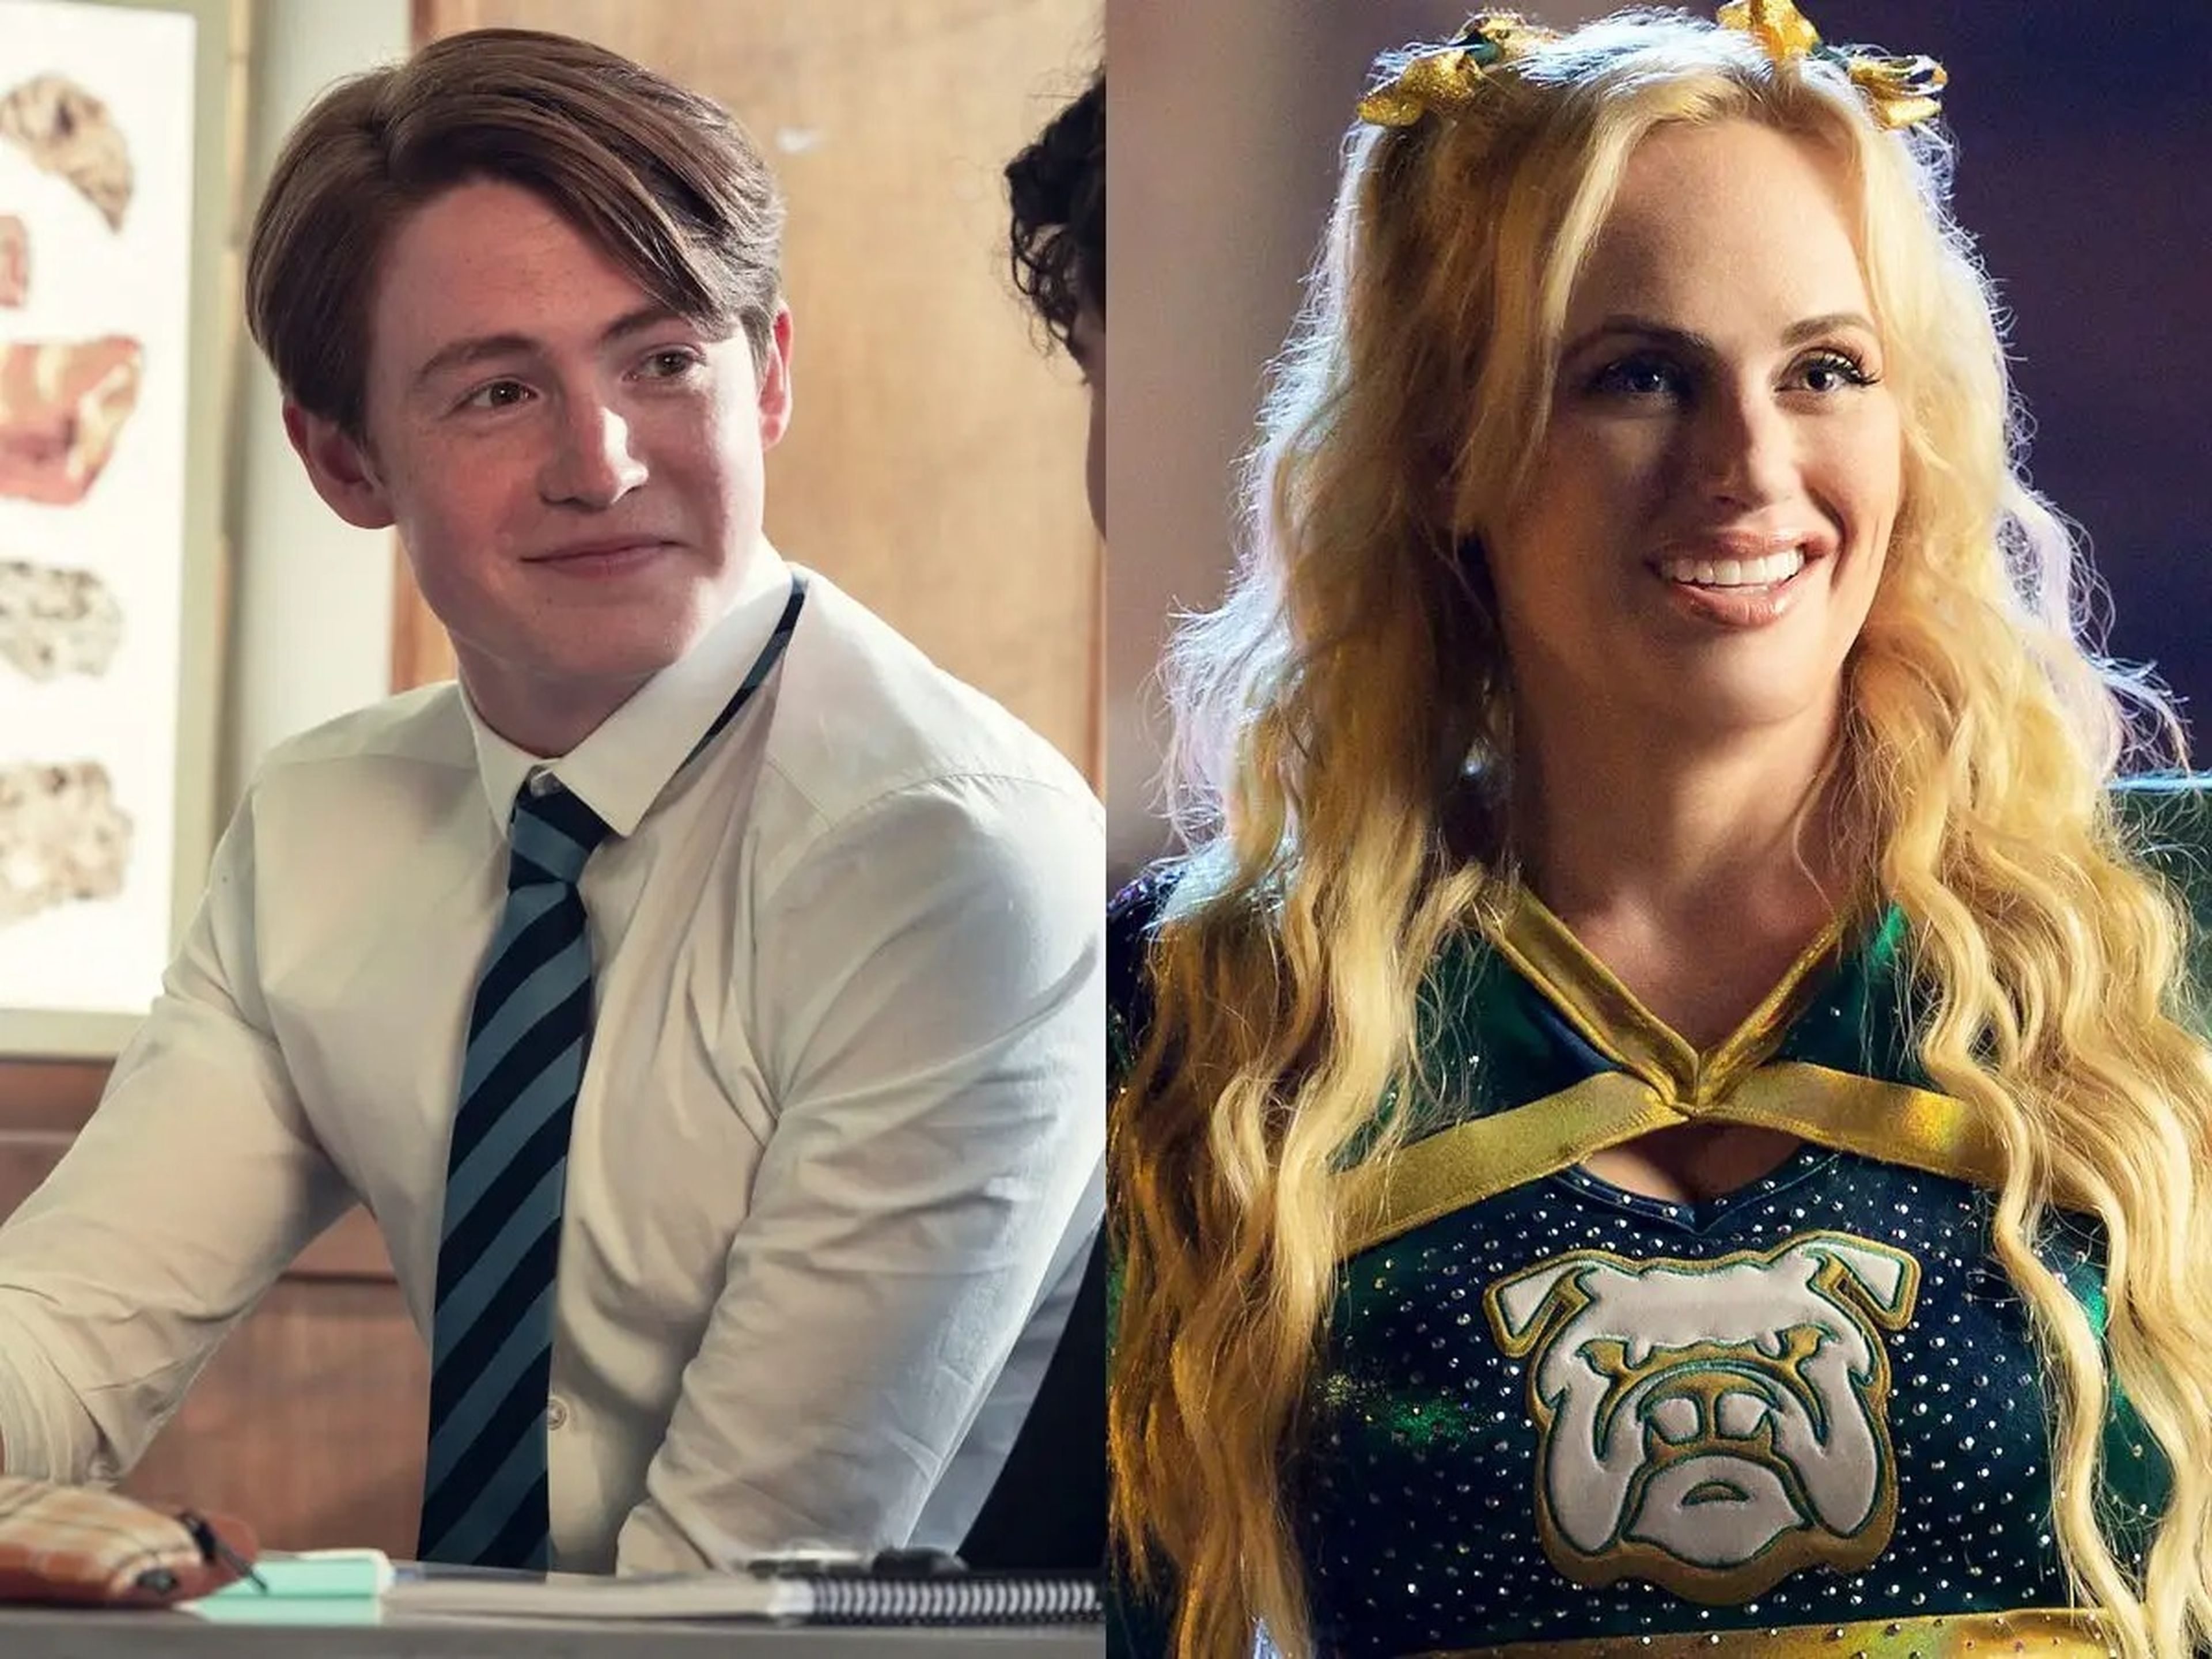 On the left, Kit Connor in white button down with tie on "Heartstopper." On the right, Rebel Wilson in a cheer outfit in "Senior Year."